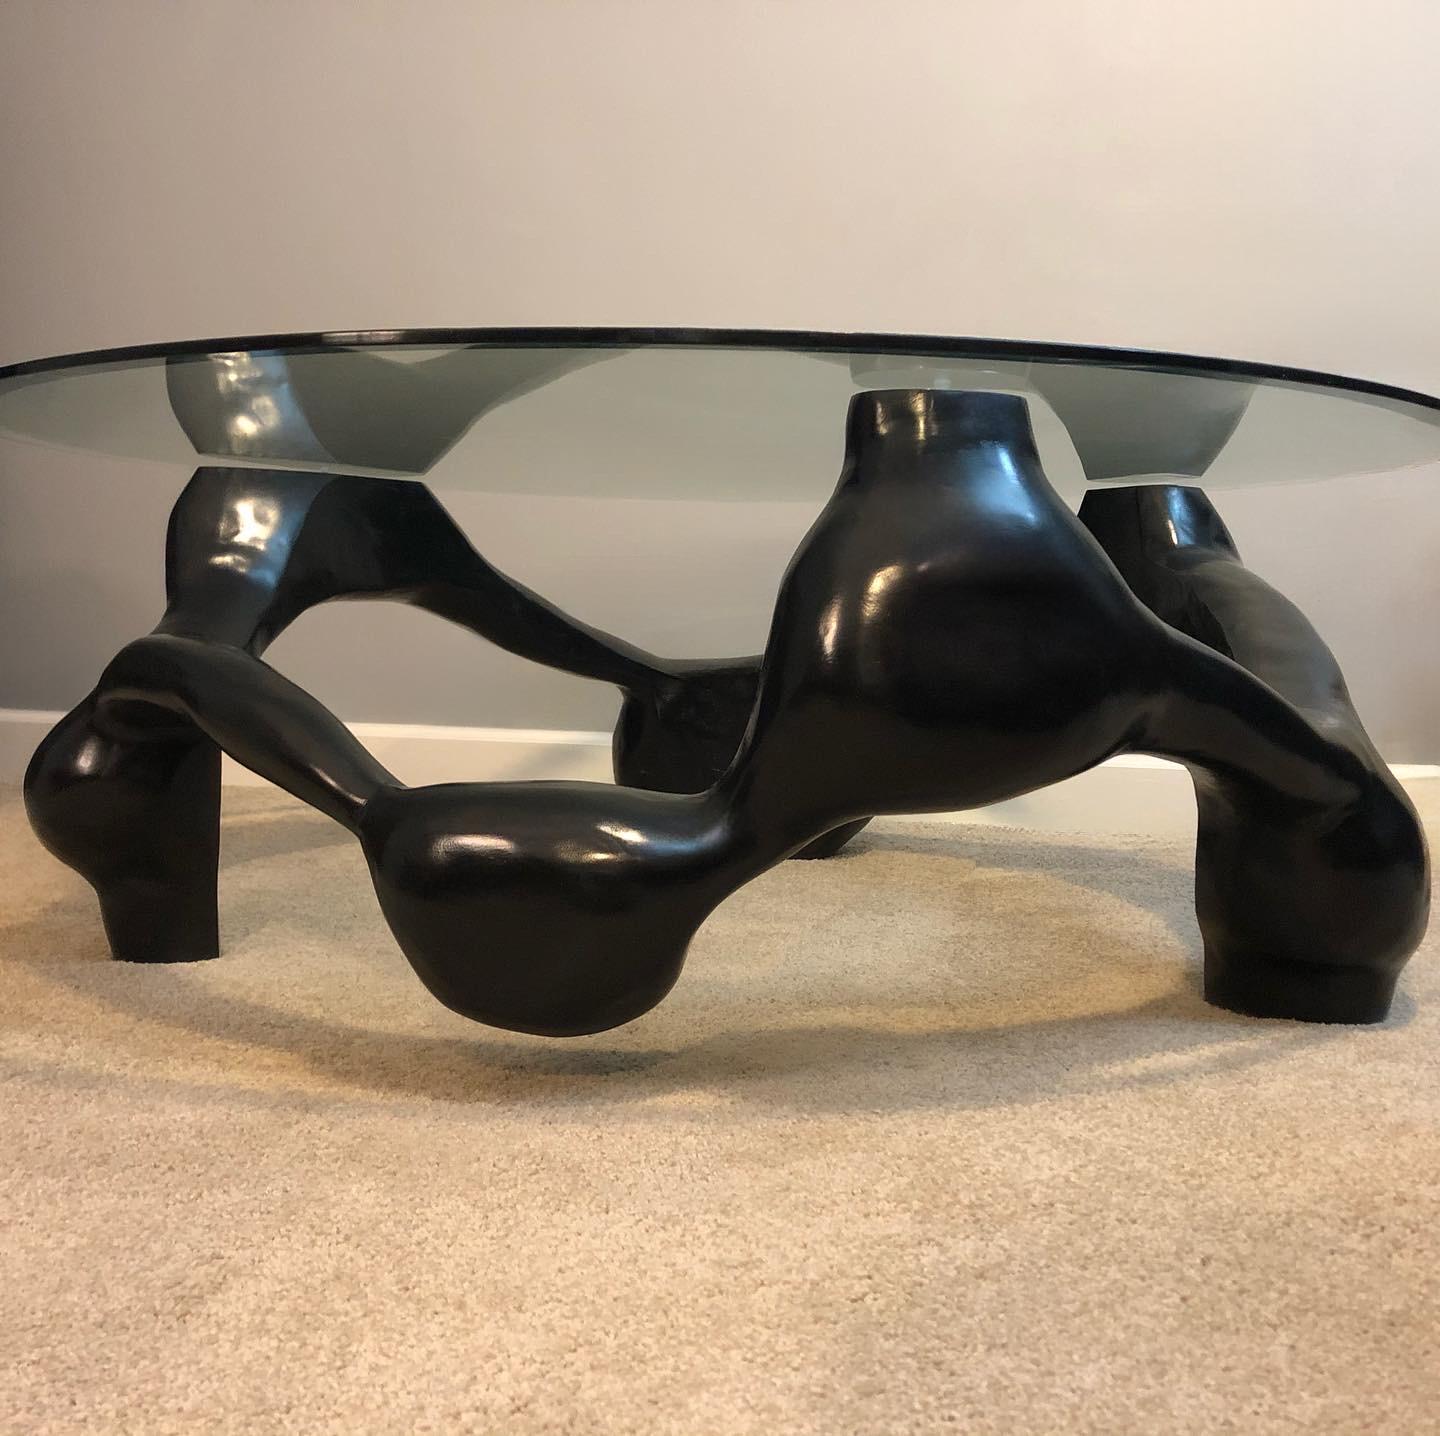 This modern hand-carved coffee table is made from local poplar sanded smooth and colored with ebony stain. It is a designed as a centerpiece and work of art. Its organic form fits into any modern setting. Approximately 50 hours of craftmanship went